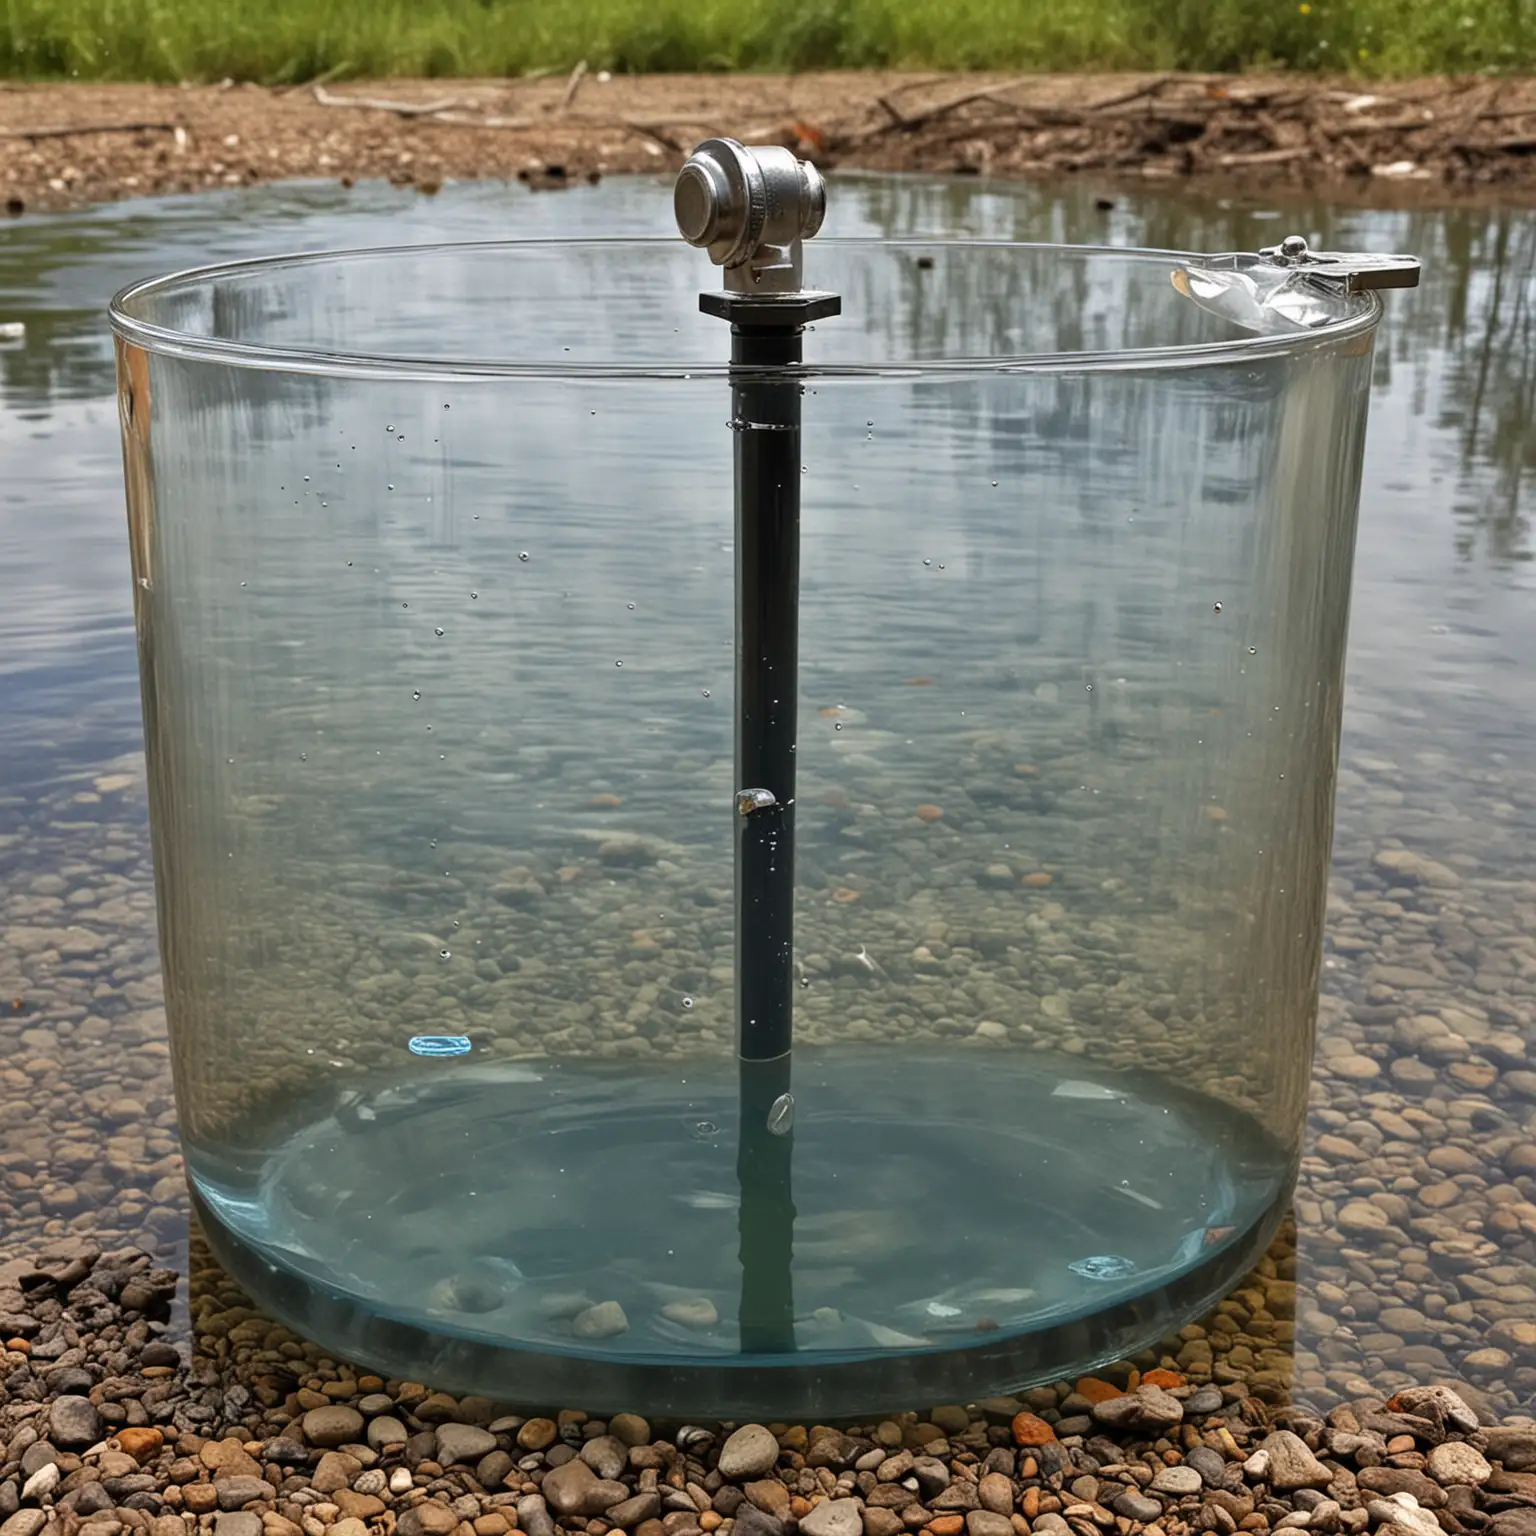 Display the relationship between water's buoyancy and gravity, the greater the flow rate of water, the greater the buoyancy, represent water flow rate